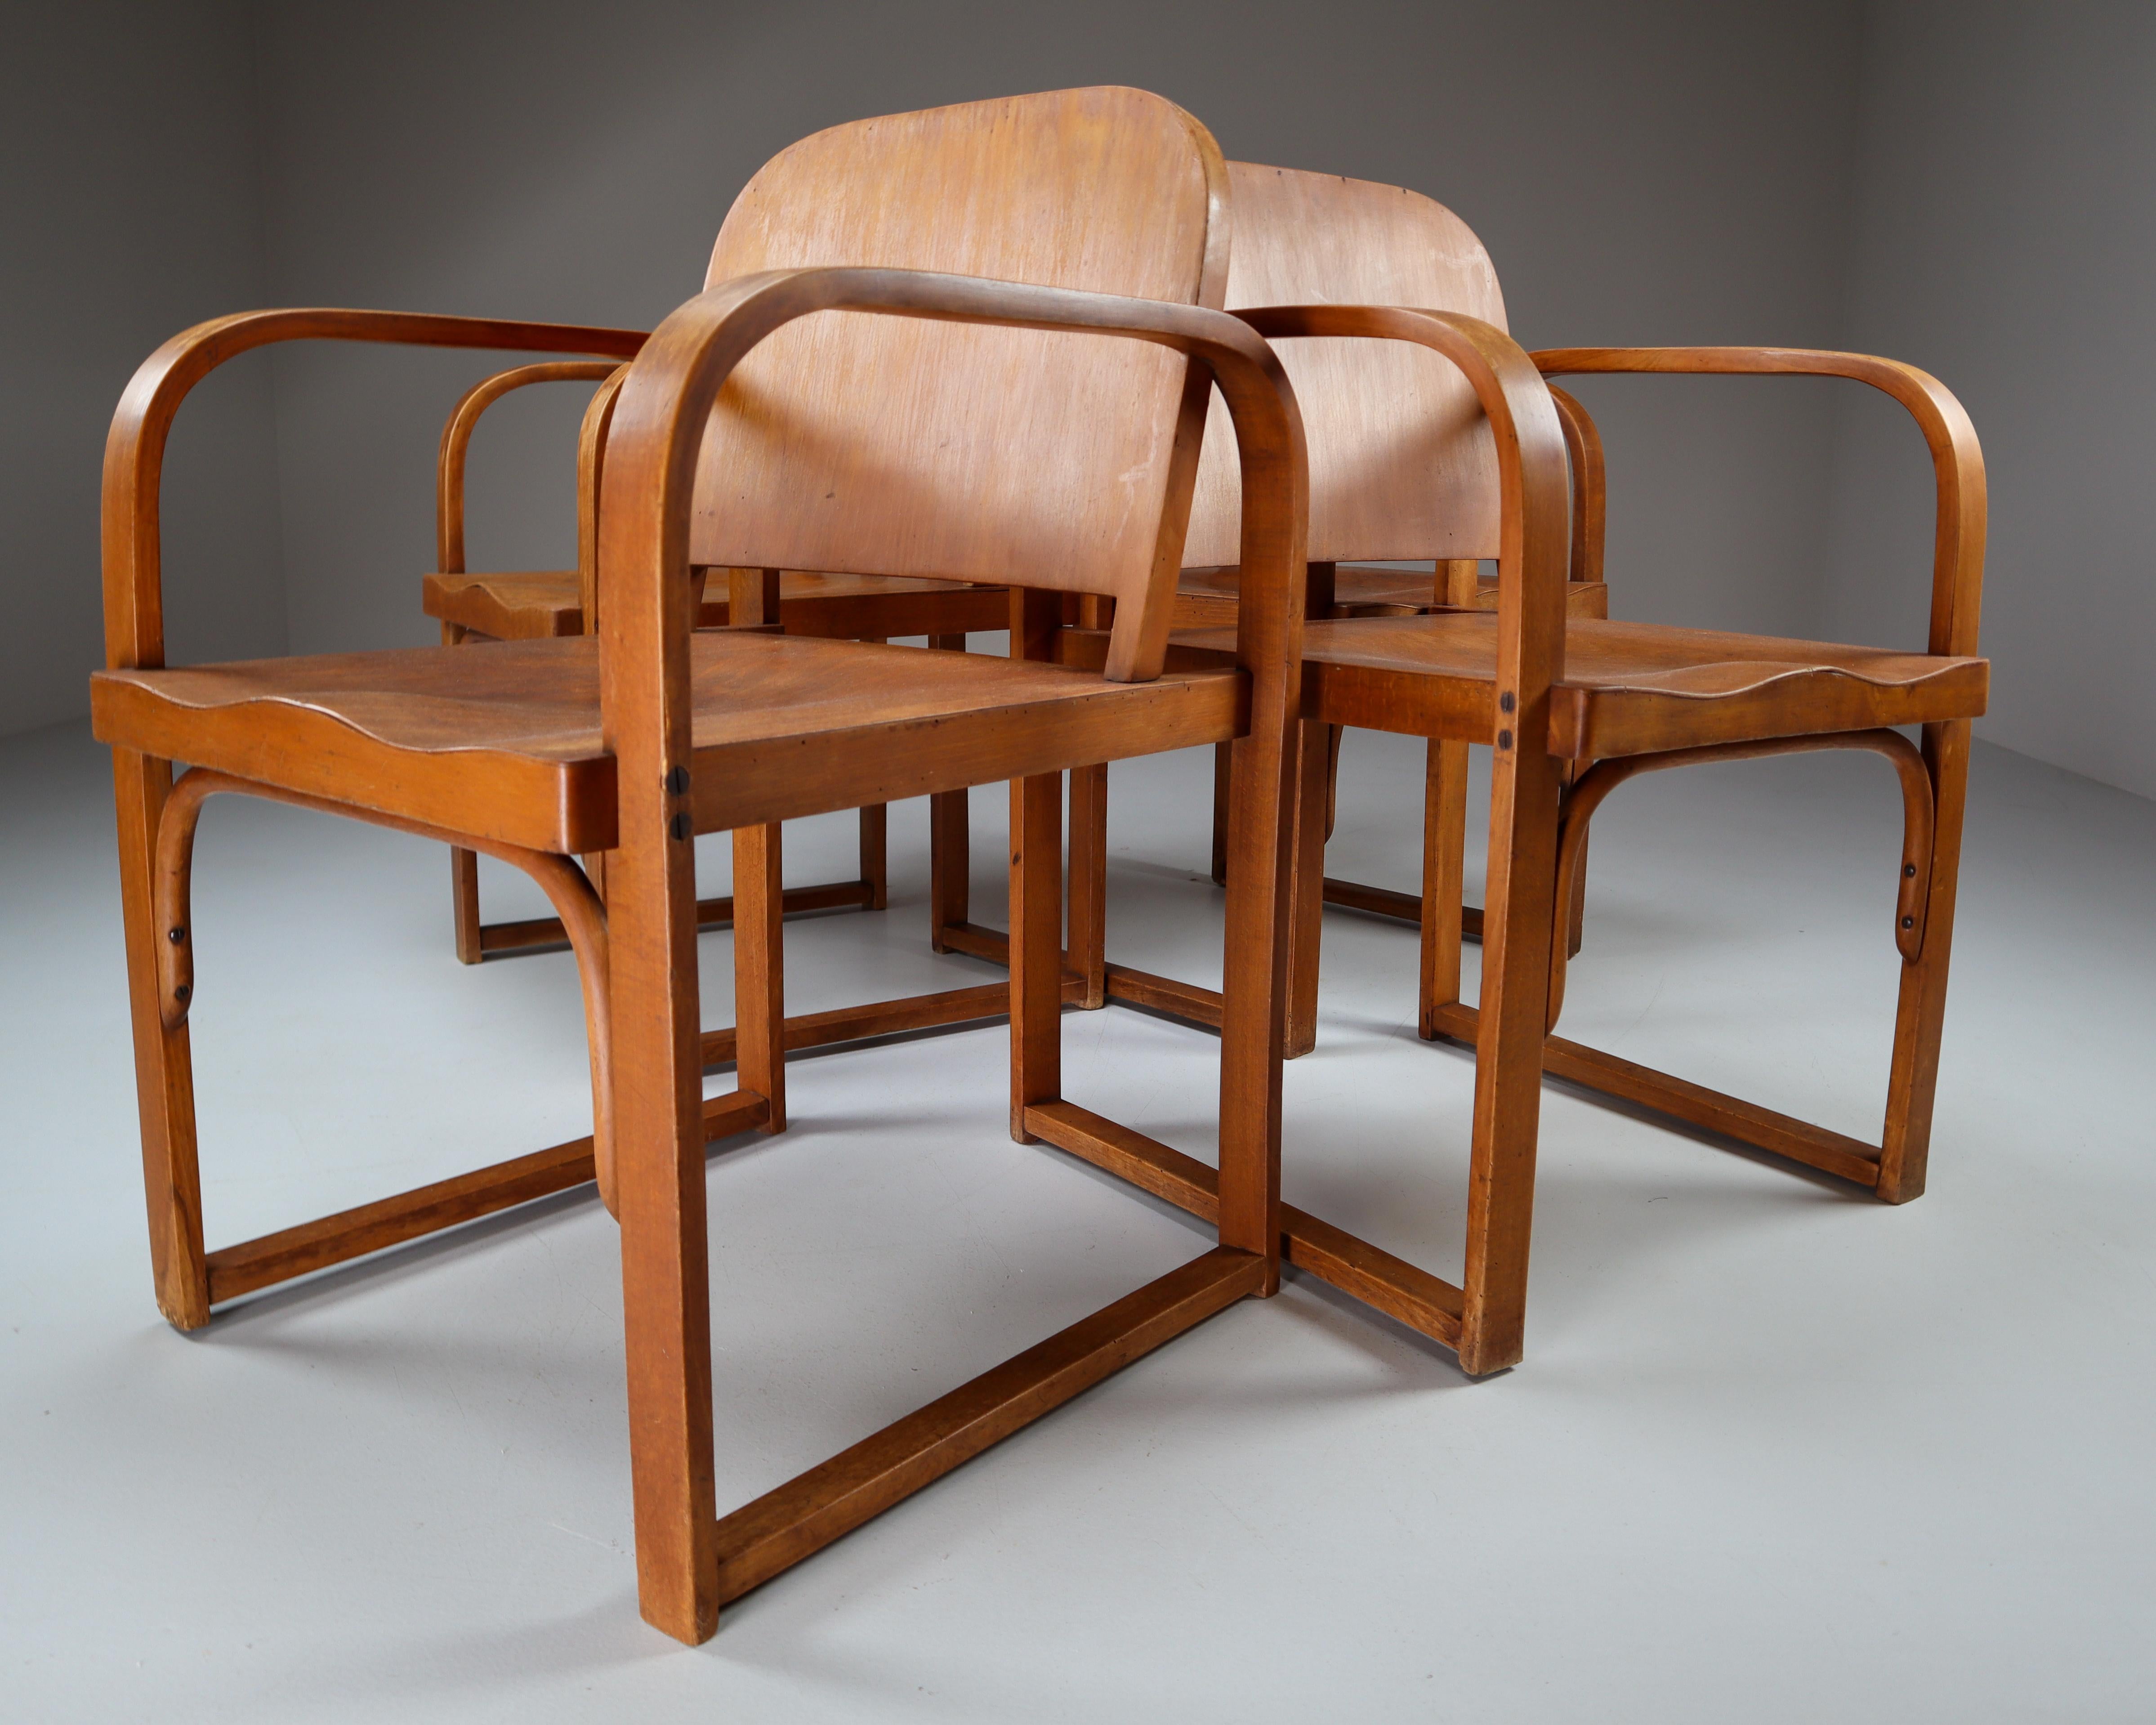 Modernist set of four armchairs made by Tatra in 1930s. The chairs are built of sharp, geometric lines with rounded corners. The armrests are made of bent technology, the chair seat is gently ergonomically shaped. The chairs are made of bent,